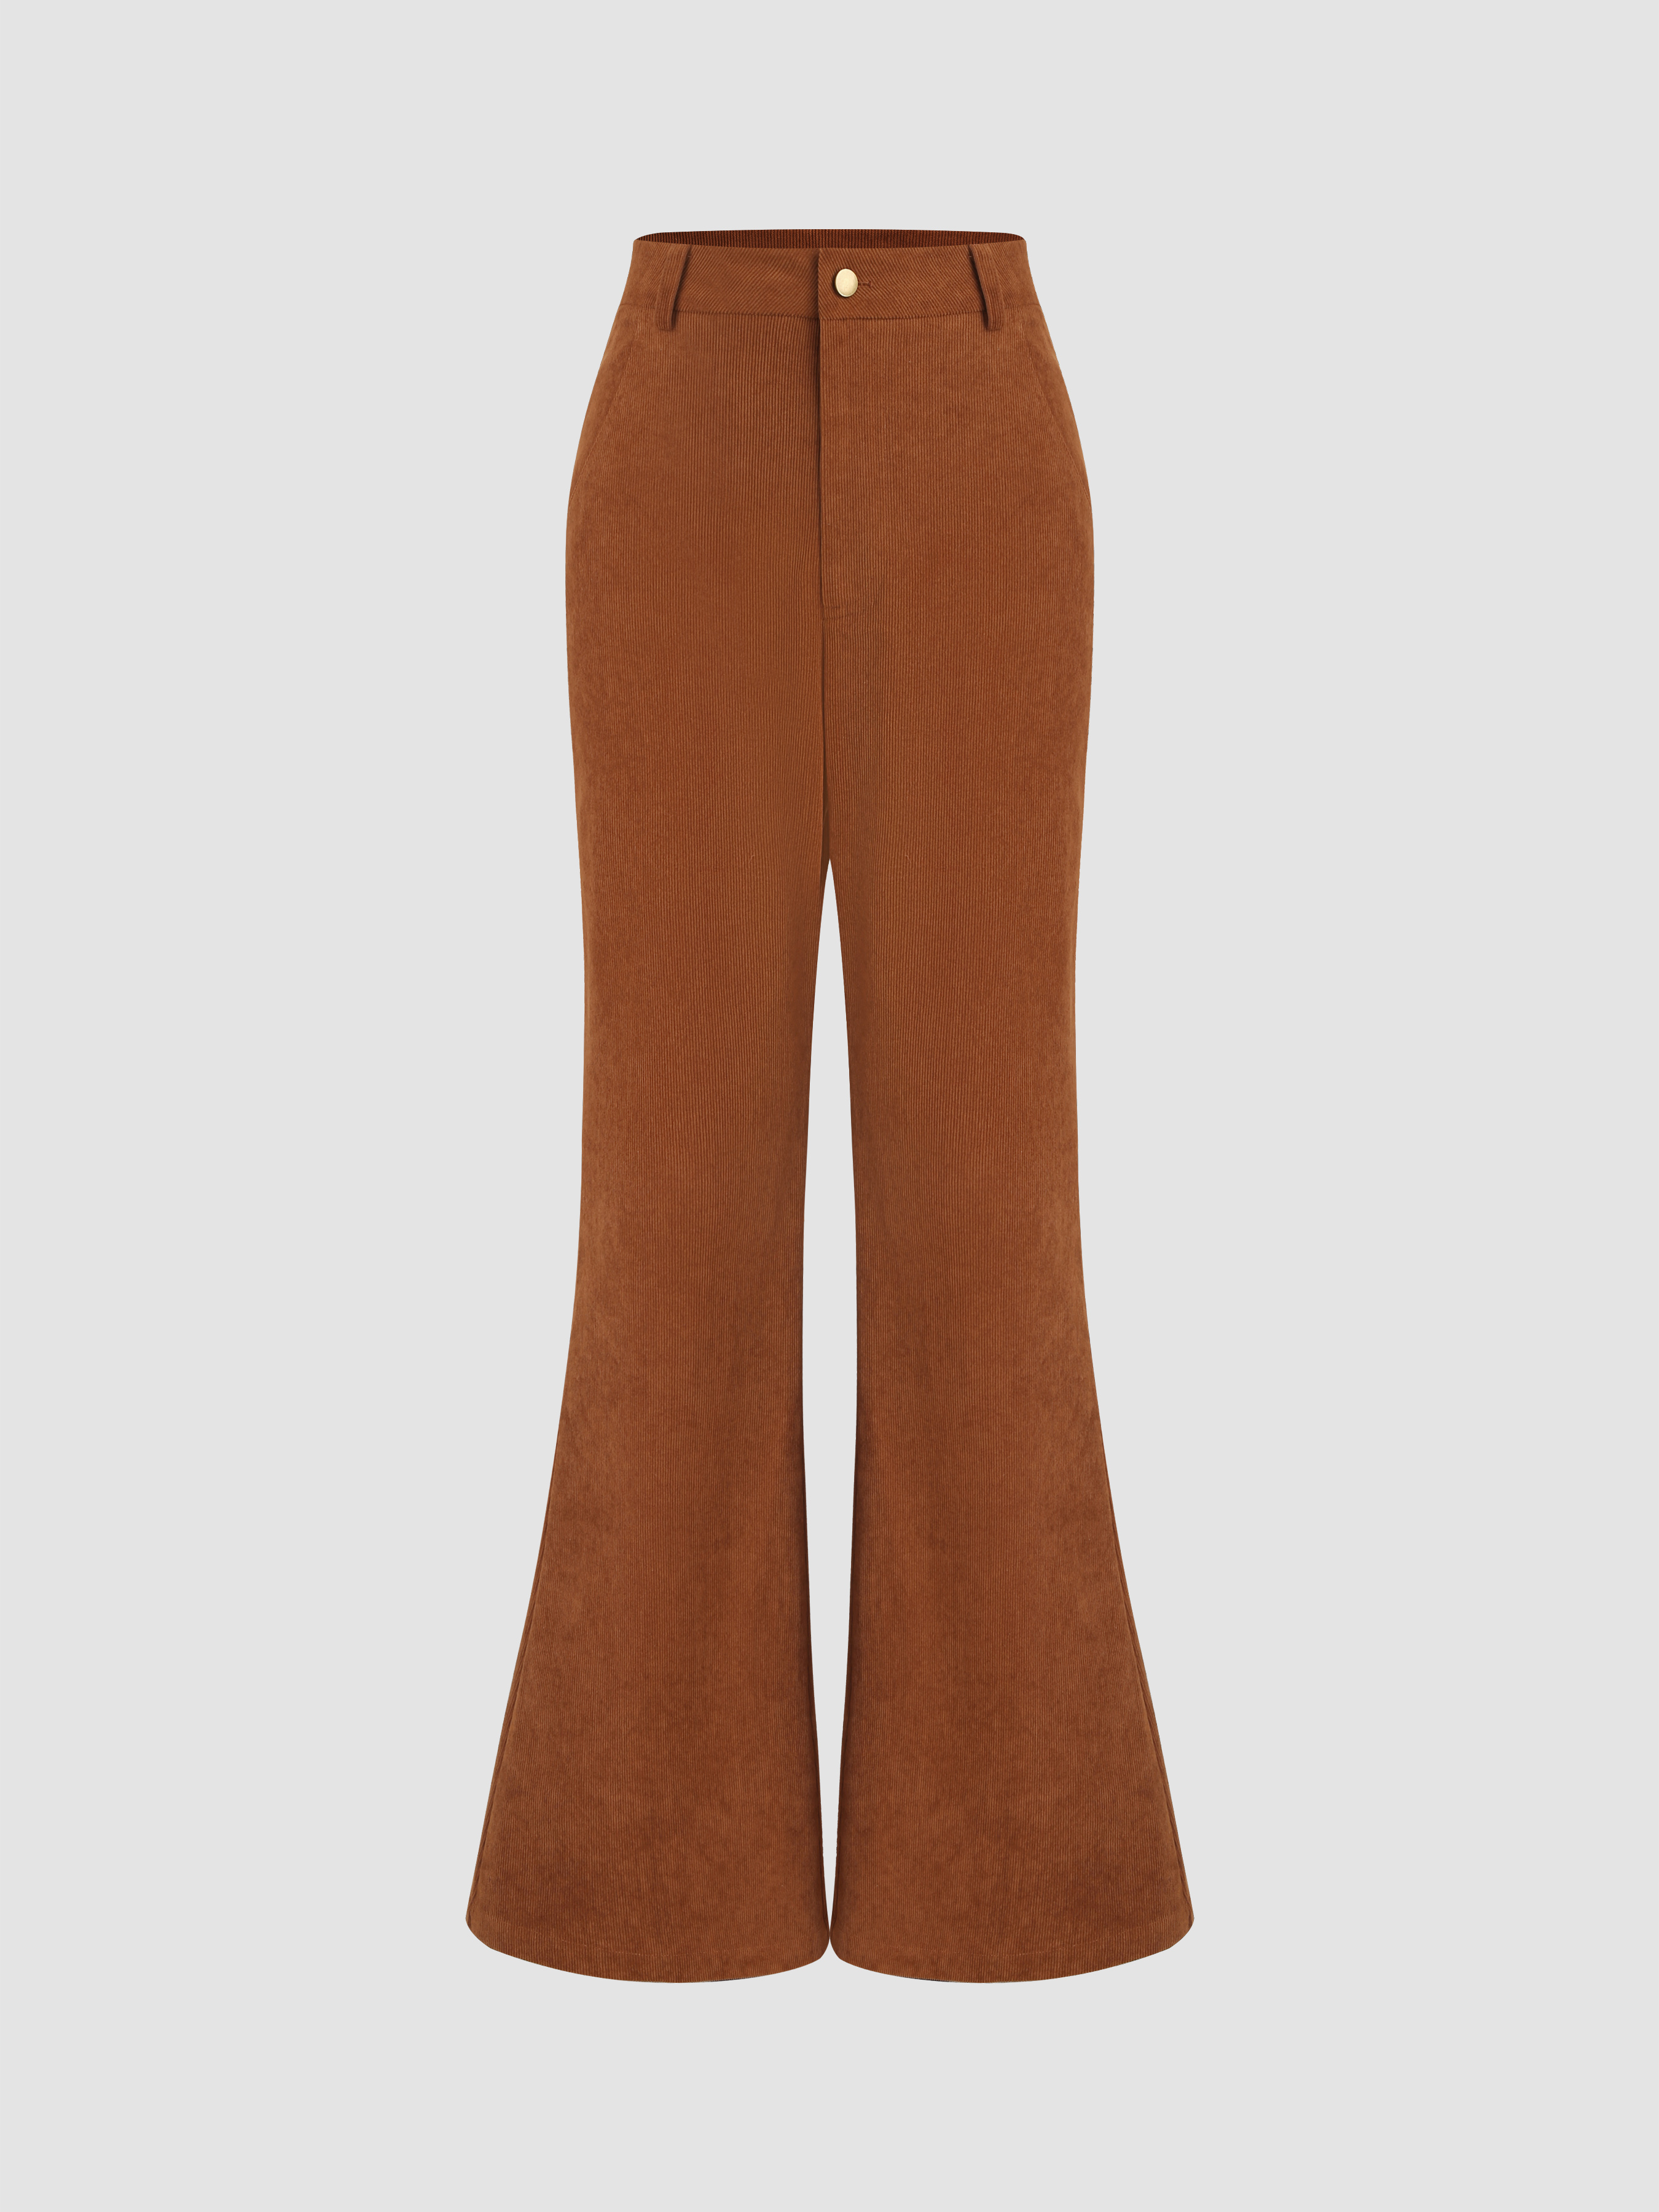 The Perfect Vintage Flare Pant: Corduroy Edition